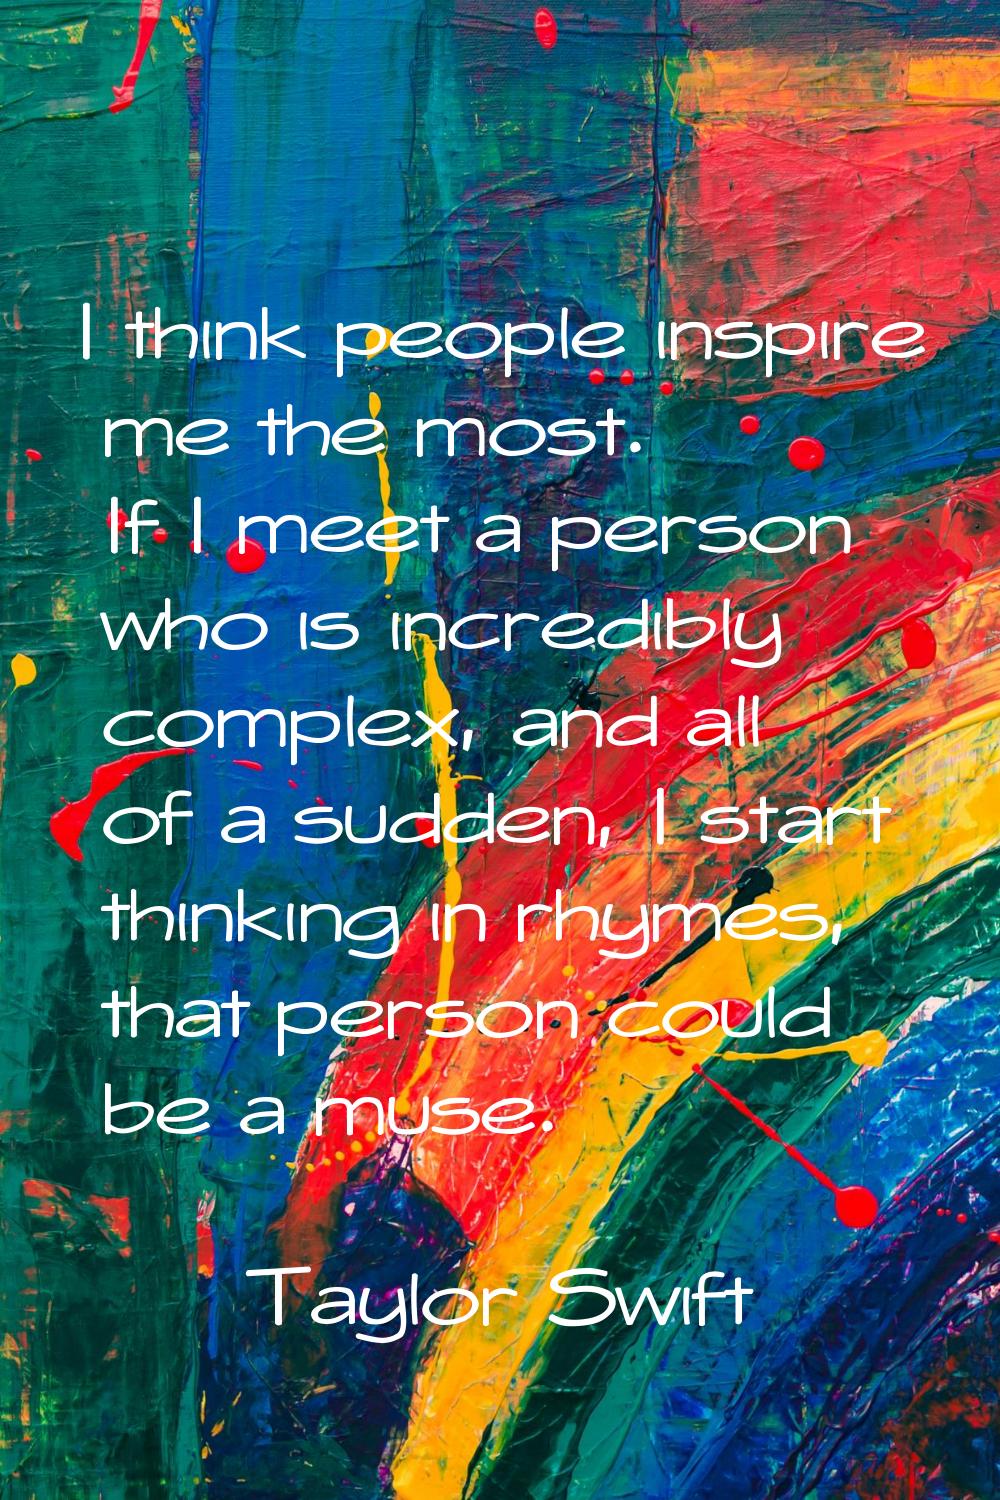 I think people inspire me the most. If I meet a person who is incredibly complex, and all of a sudd